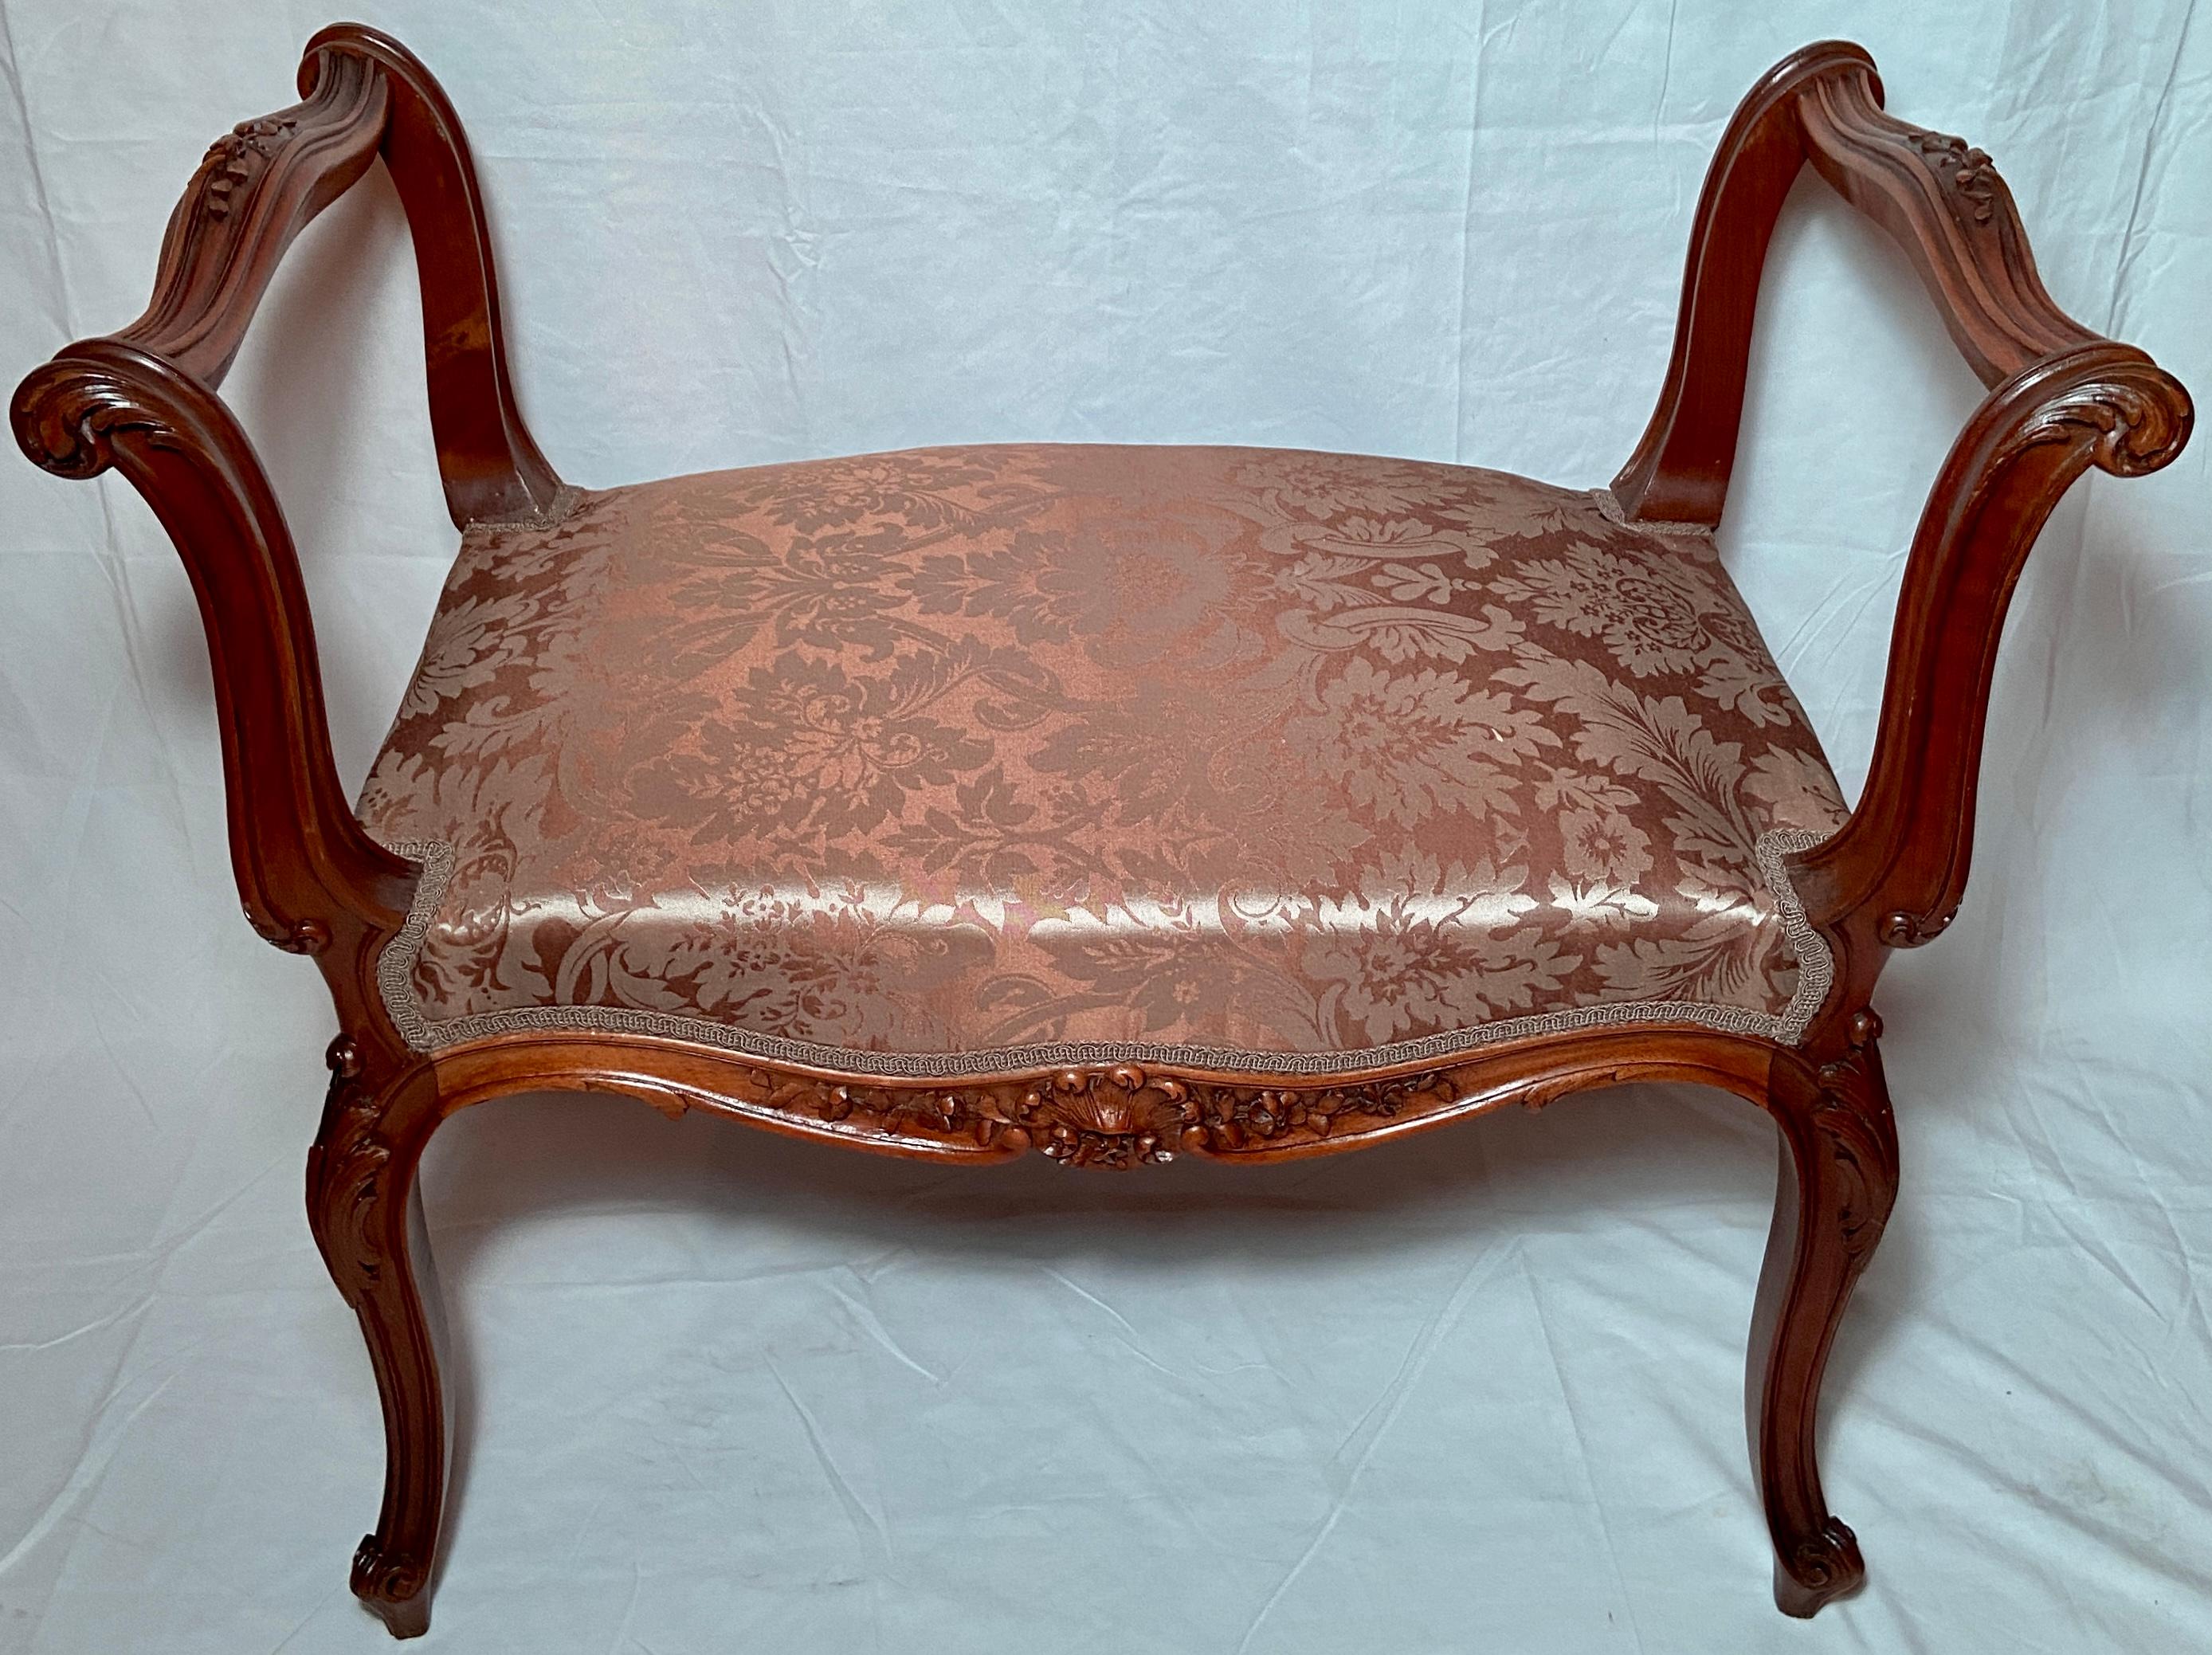 Antique French walnut bench with pink silk upholstery, circa 1880.